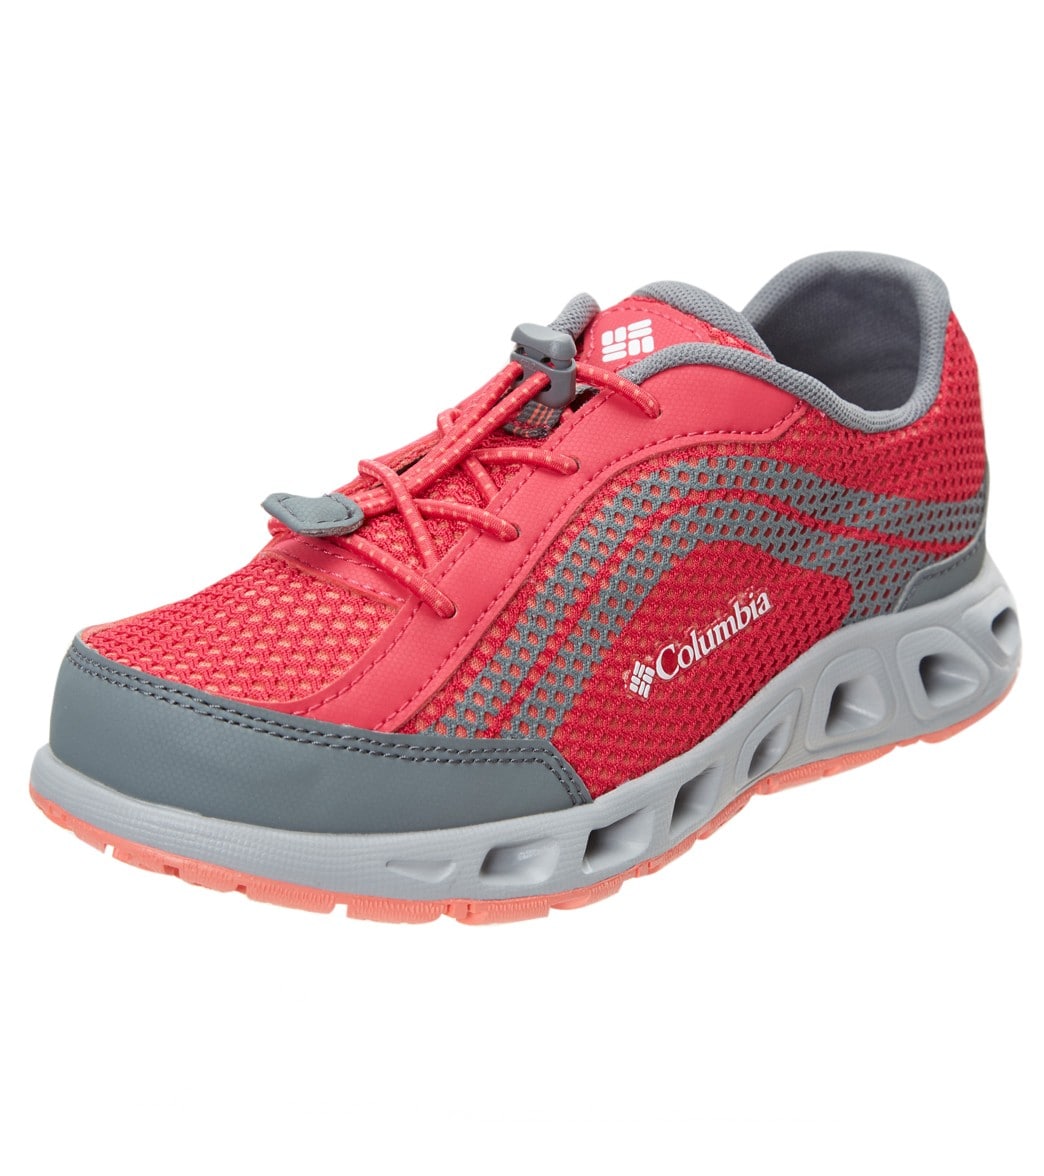 Columbia Youth Drainmaker Iv Water Shoe - Bright Rose Hot Coral 6 Rose - Swimoutlet.com